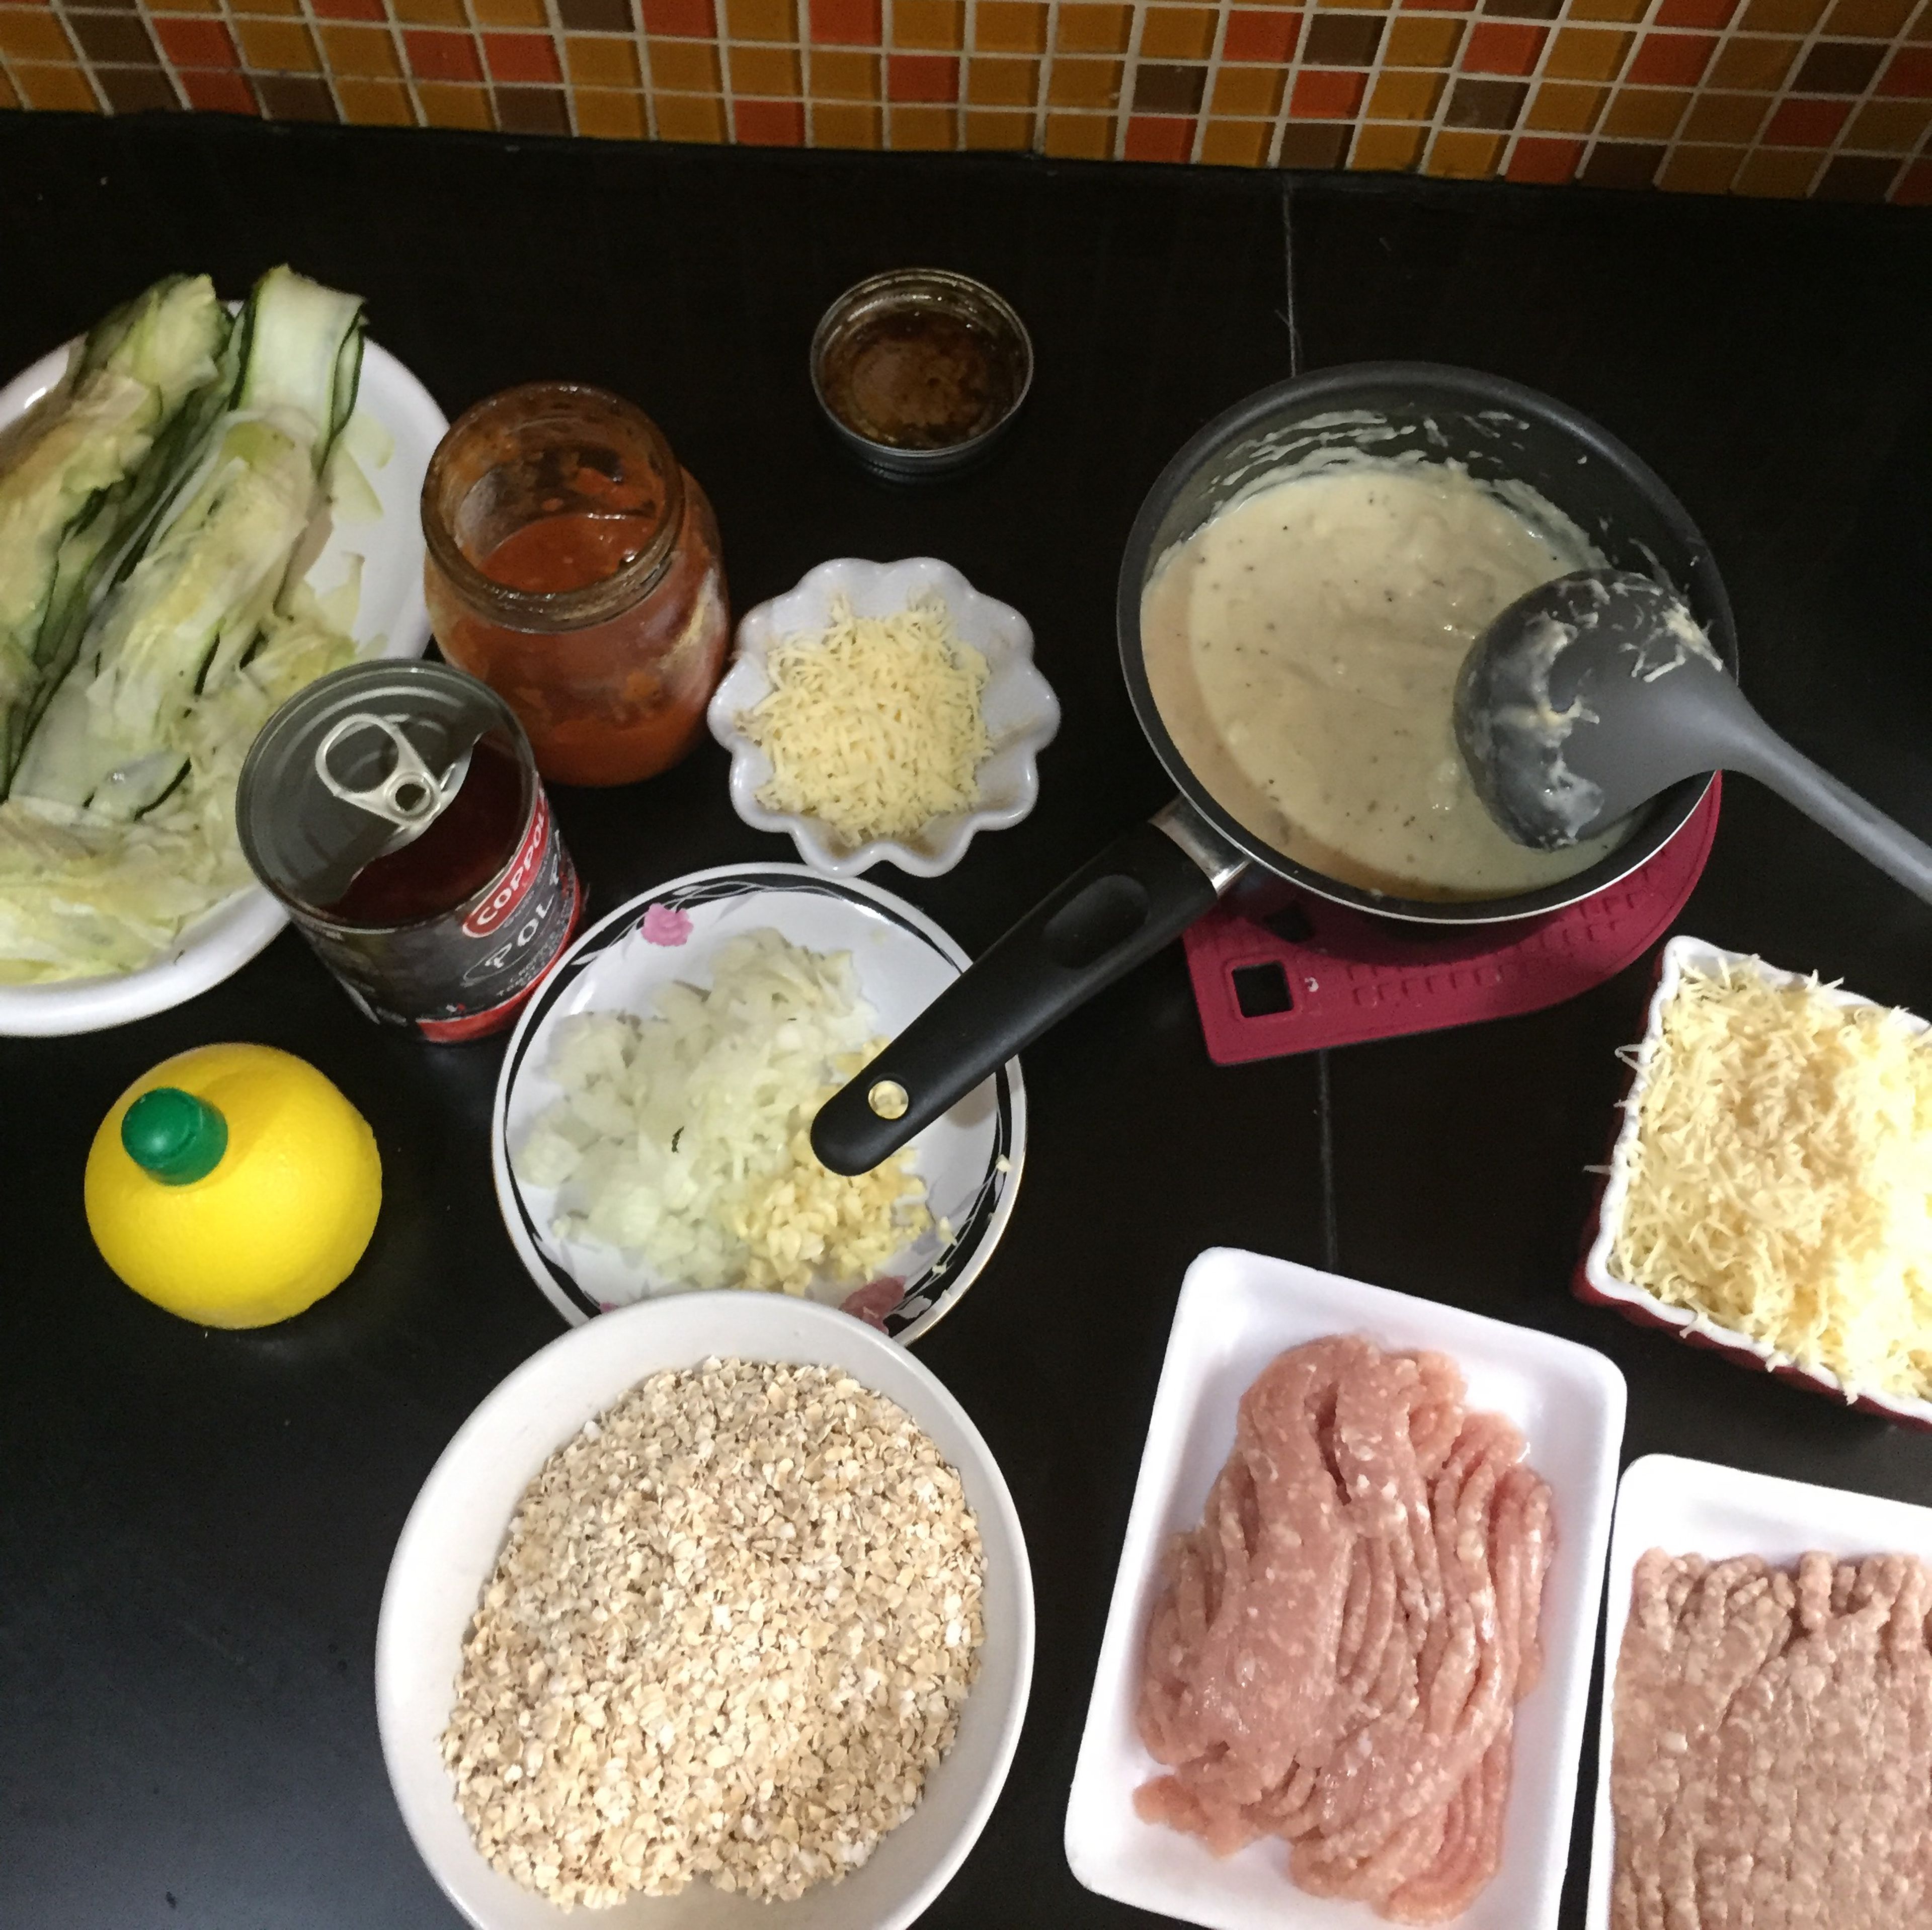 This ingredients zucchini lasange with rolled oat